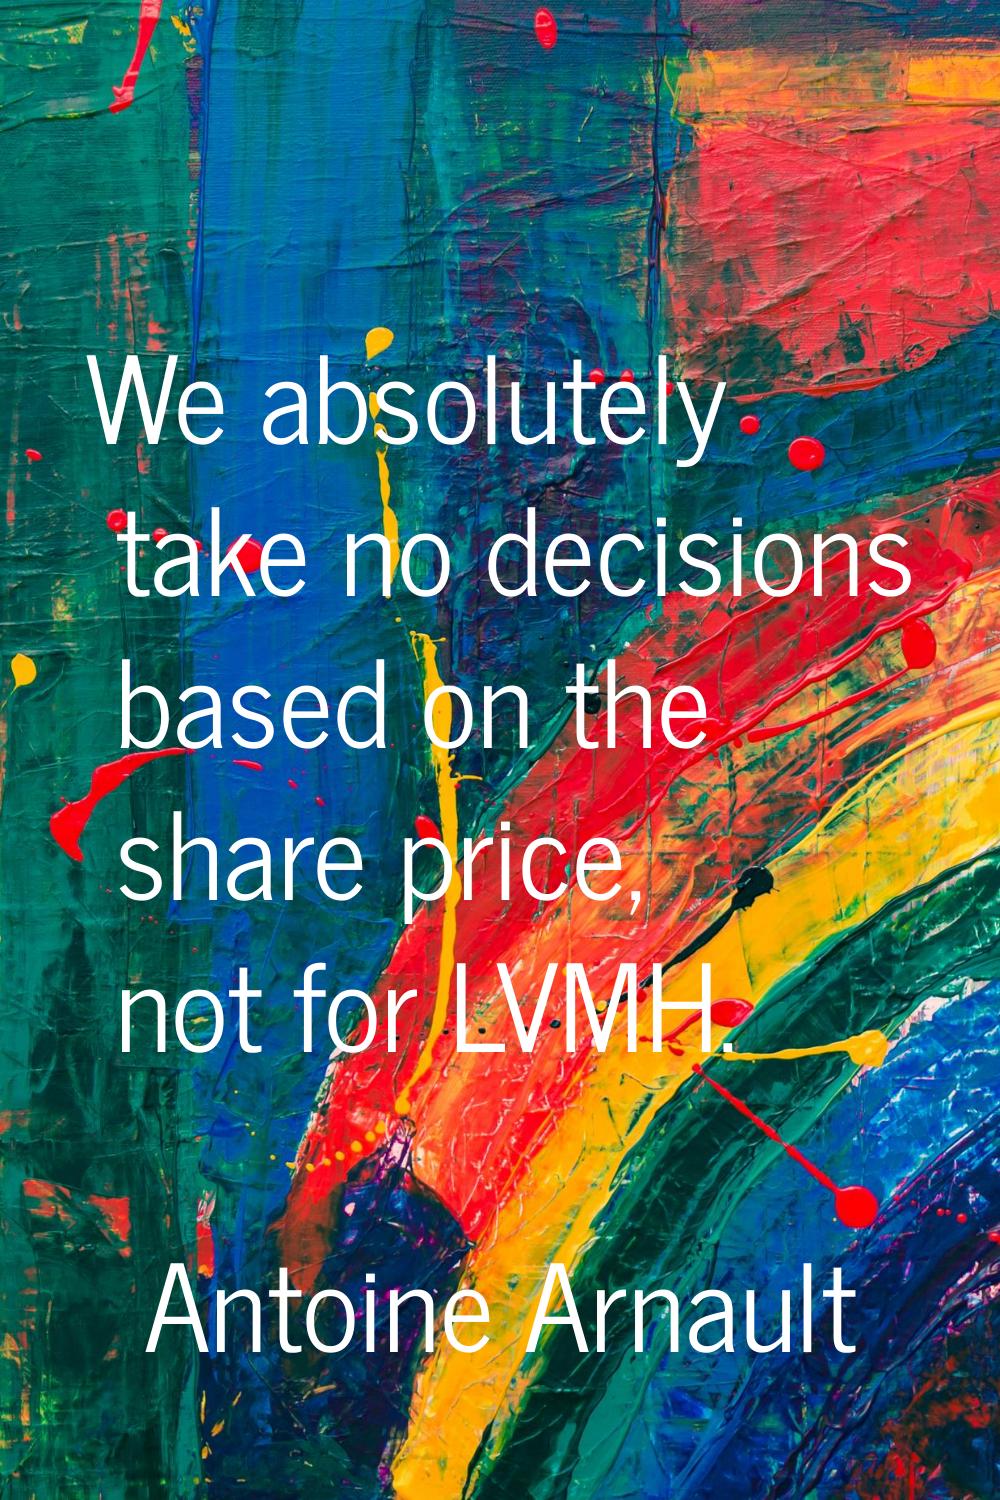 We absolutely take no decisions based on the share price, not for LVMH.